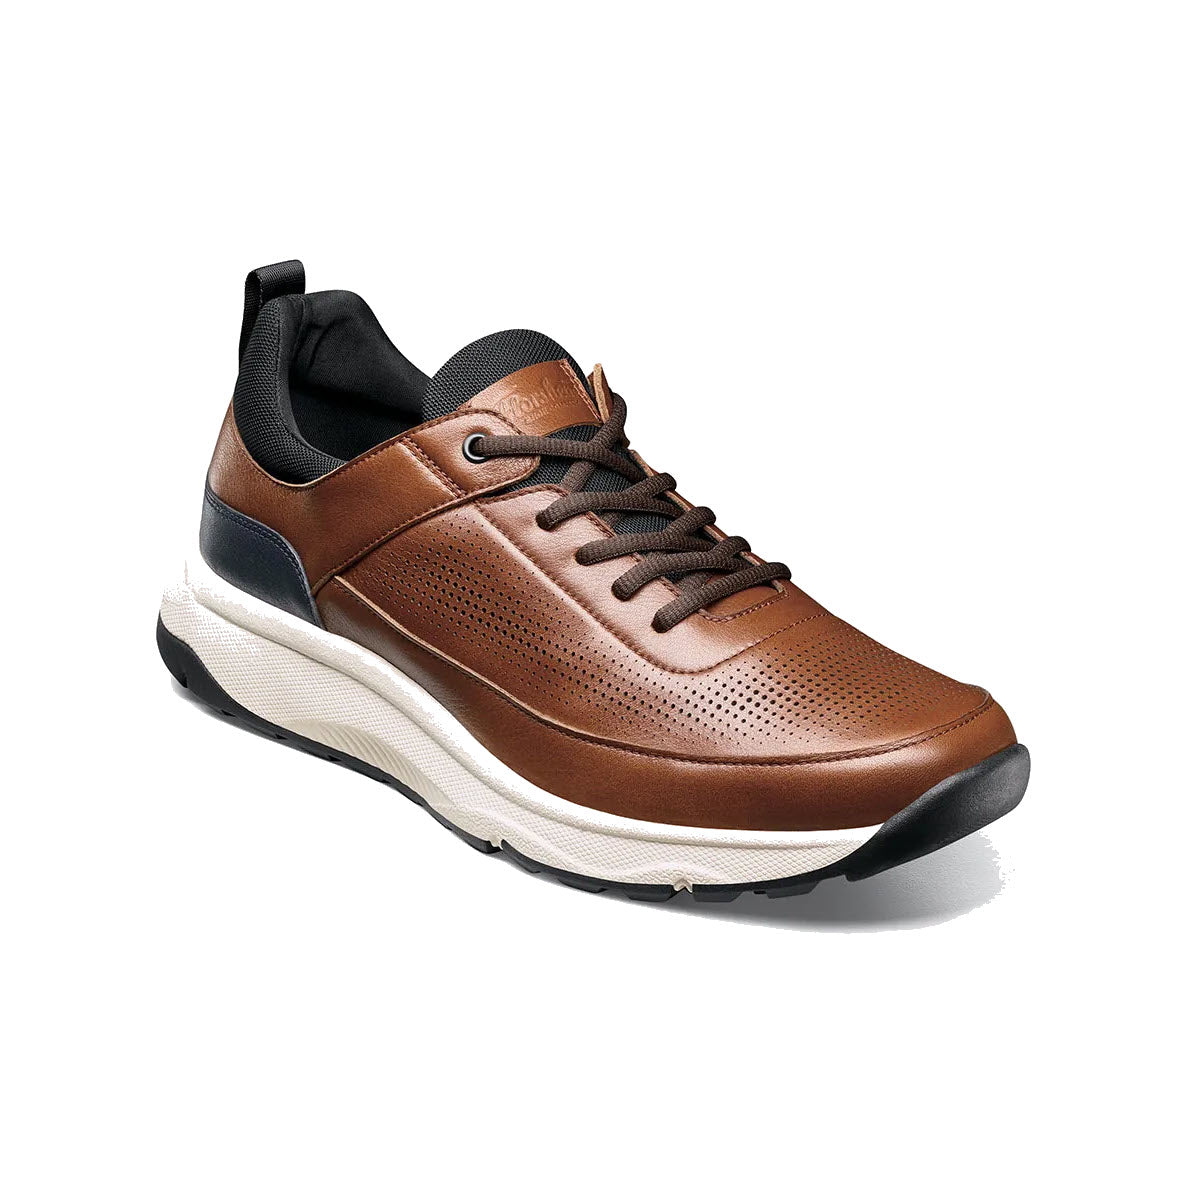 A single brown Florsheim Satellite Perf Elastic Lace Slip On Sneaker with perforated detailing and white soles, isolated on a white background.